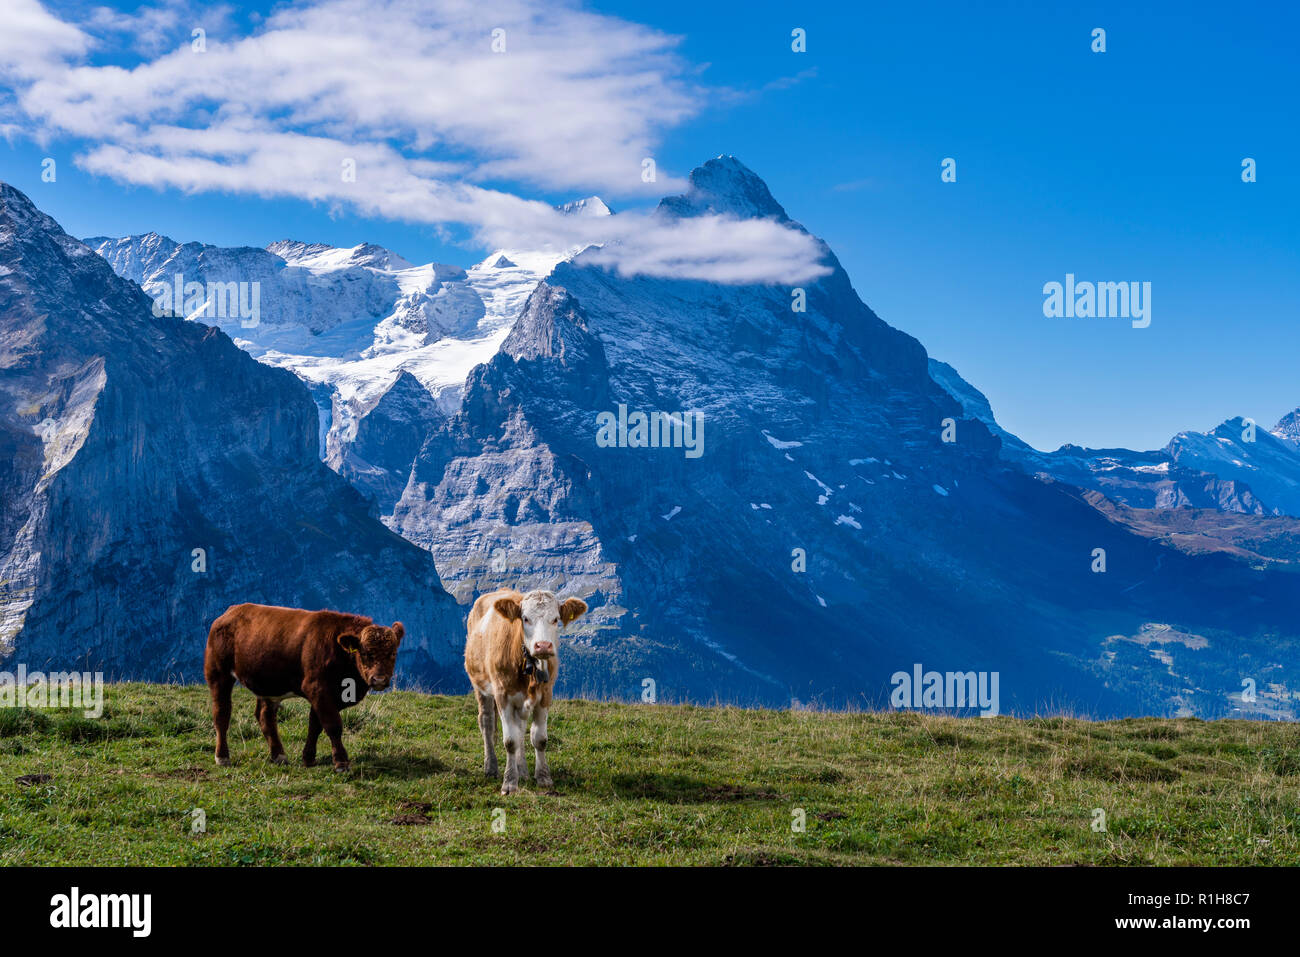 Cows, calves on the Großer Scheidegg, view of the Eiger north face, Bernese Alps, Switzerland Stock Photo